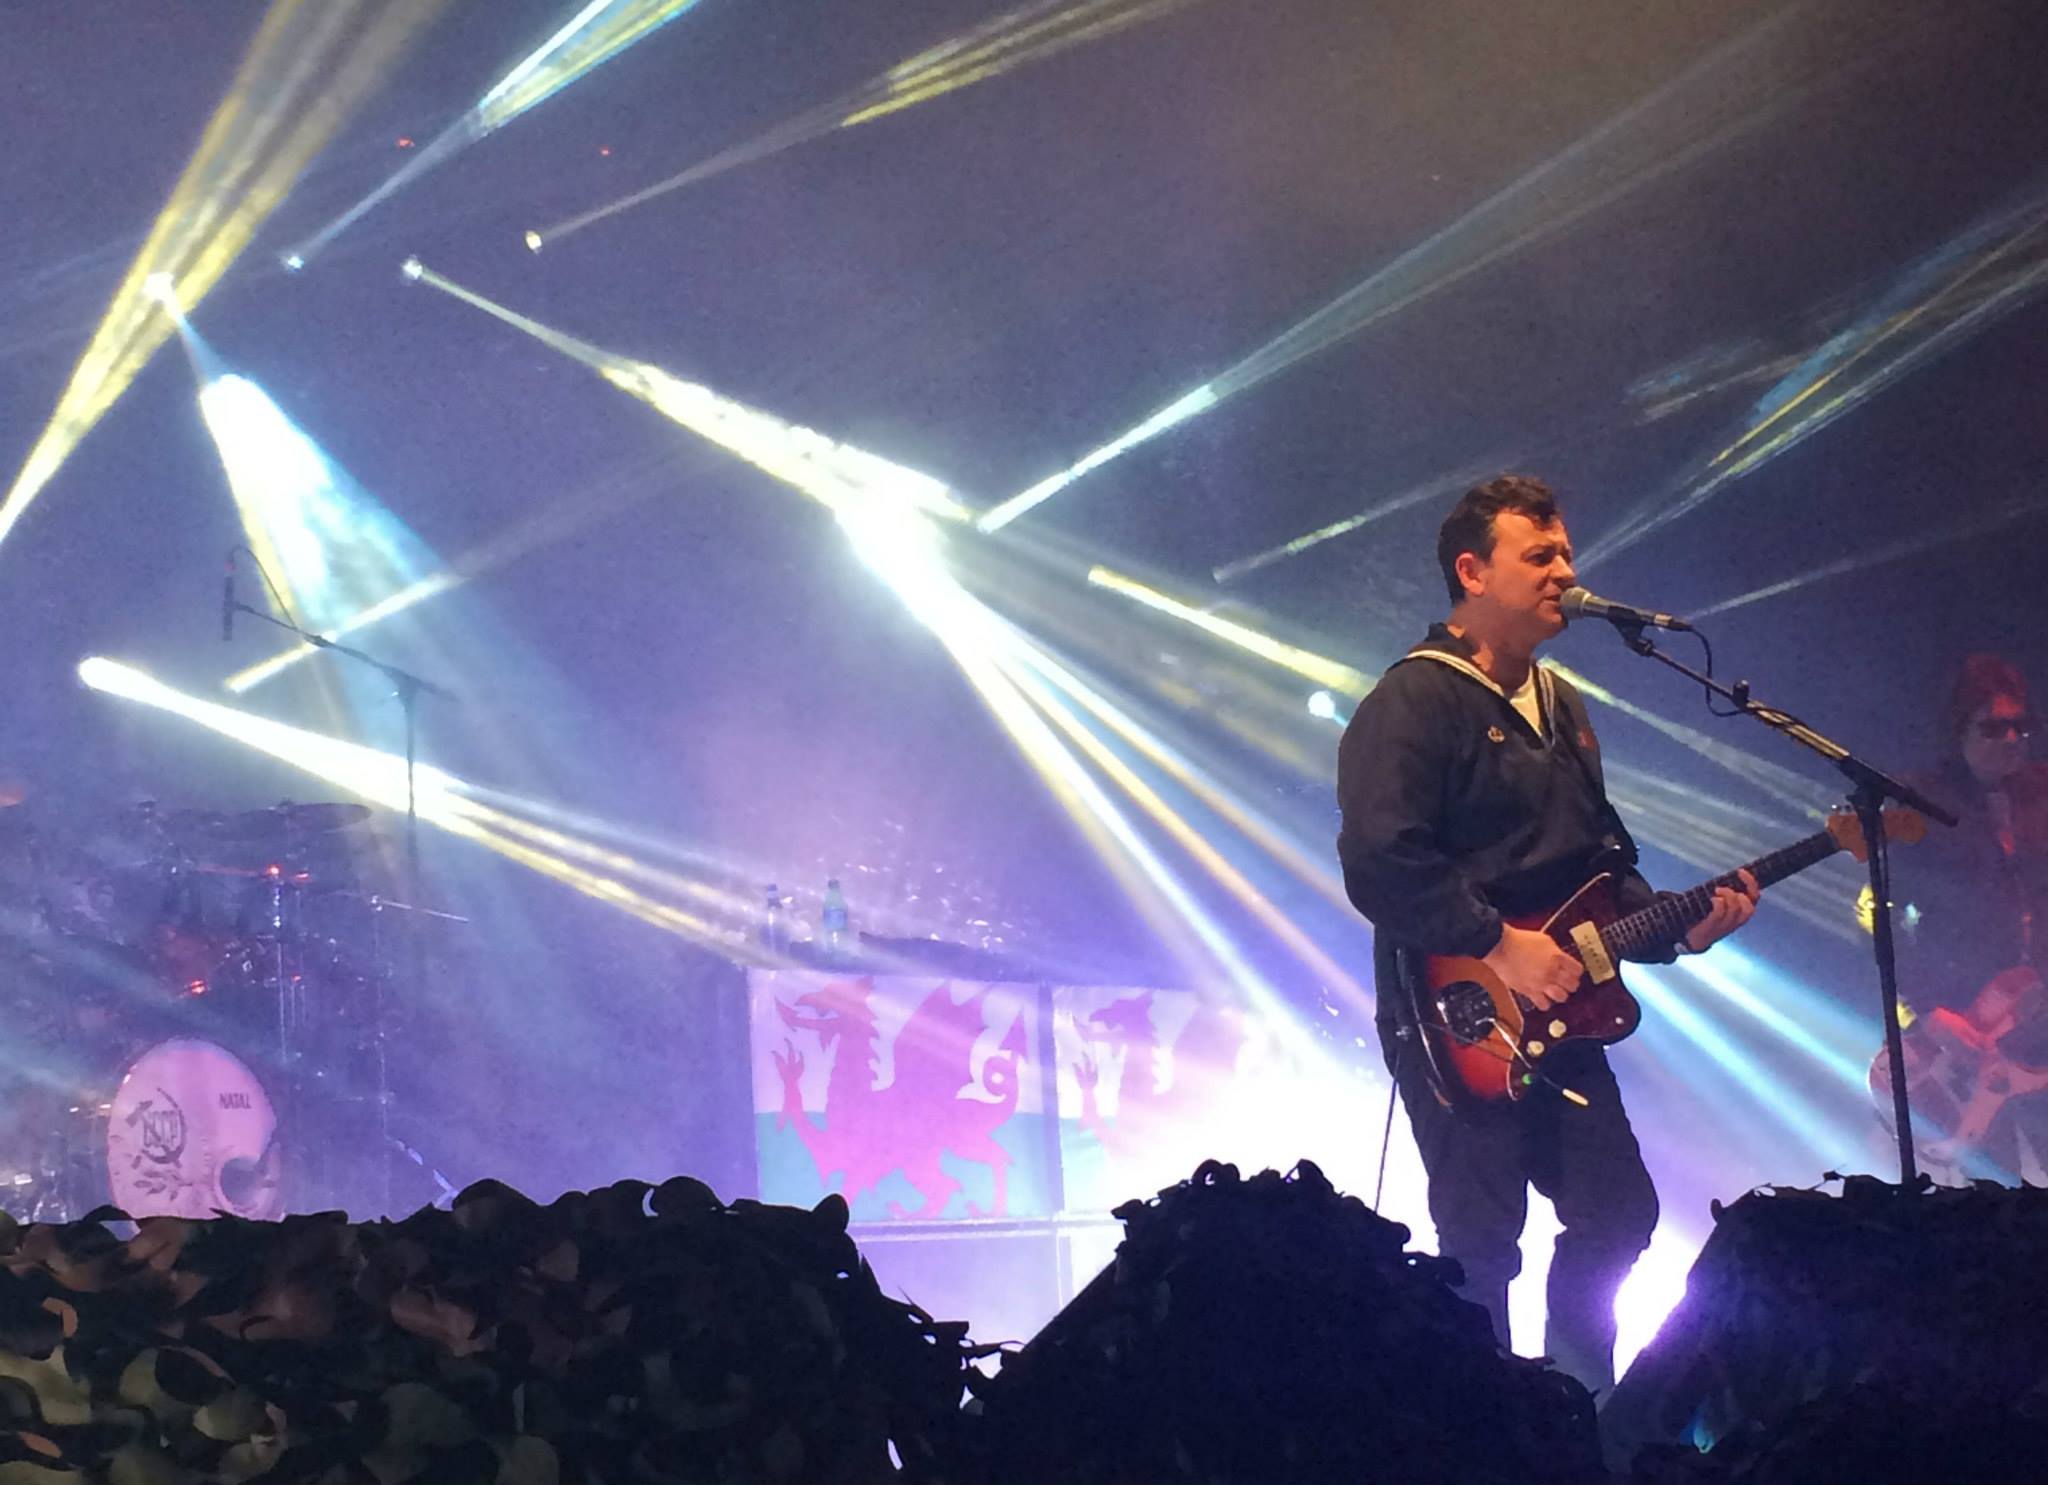 James Dean Bradfield of the Manic Street Preachers performing on stage.